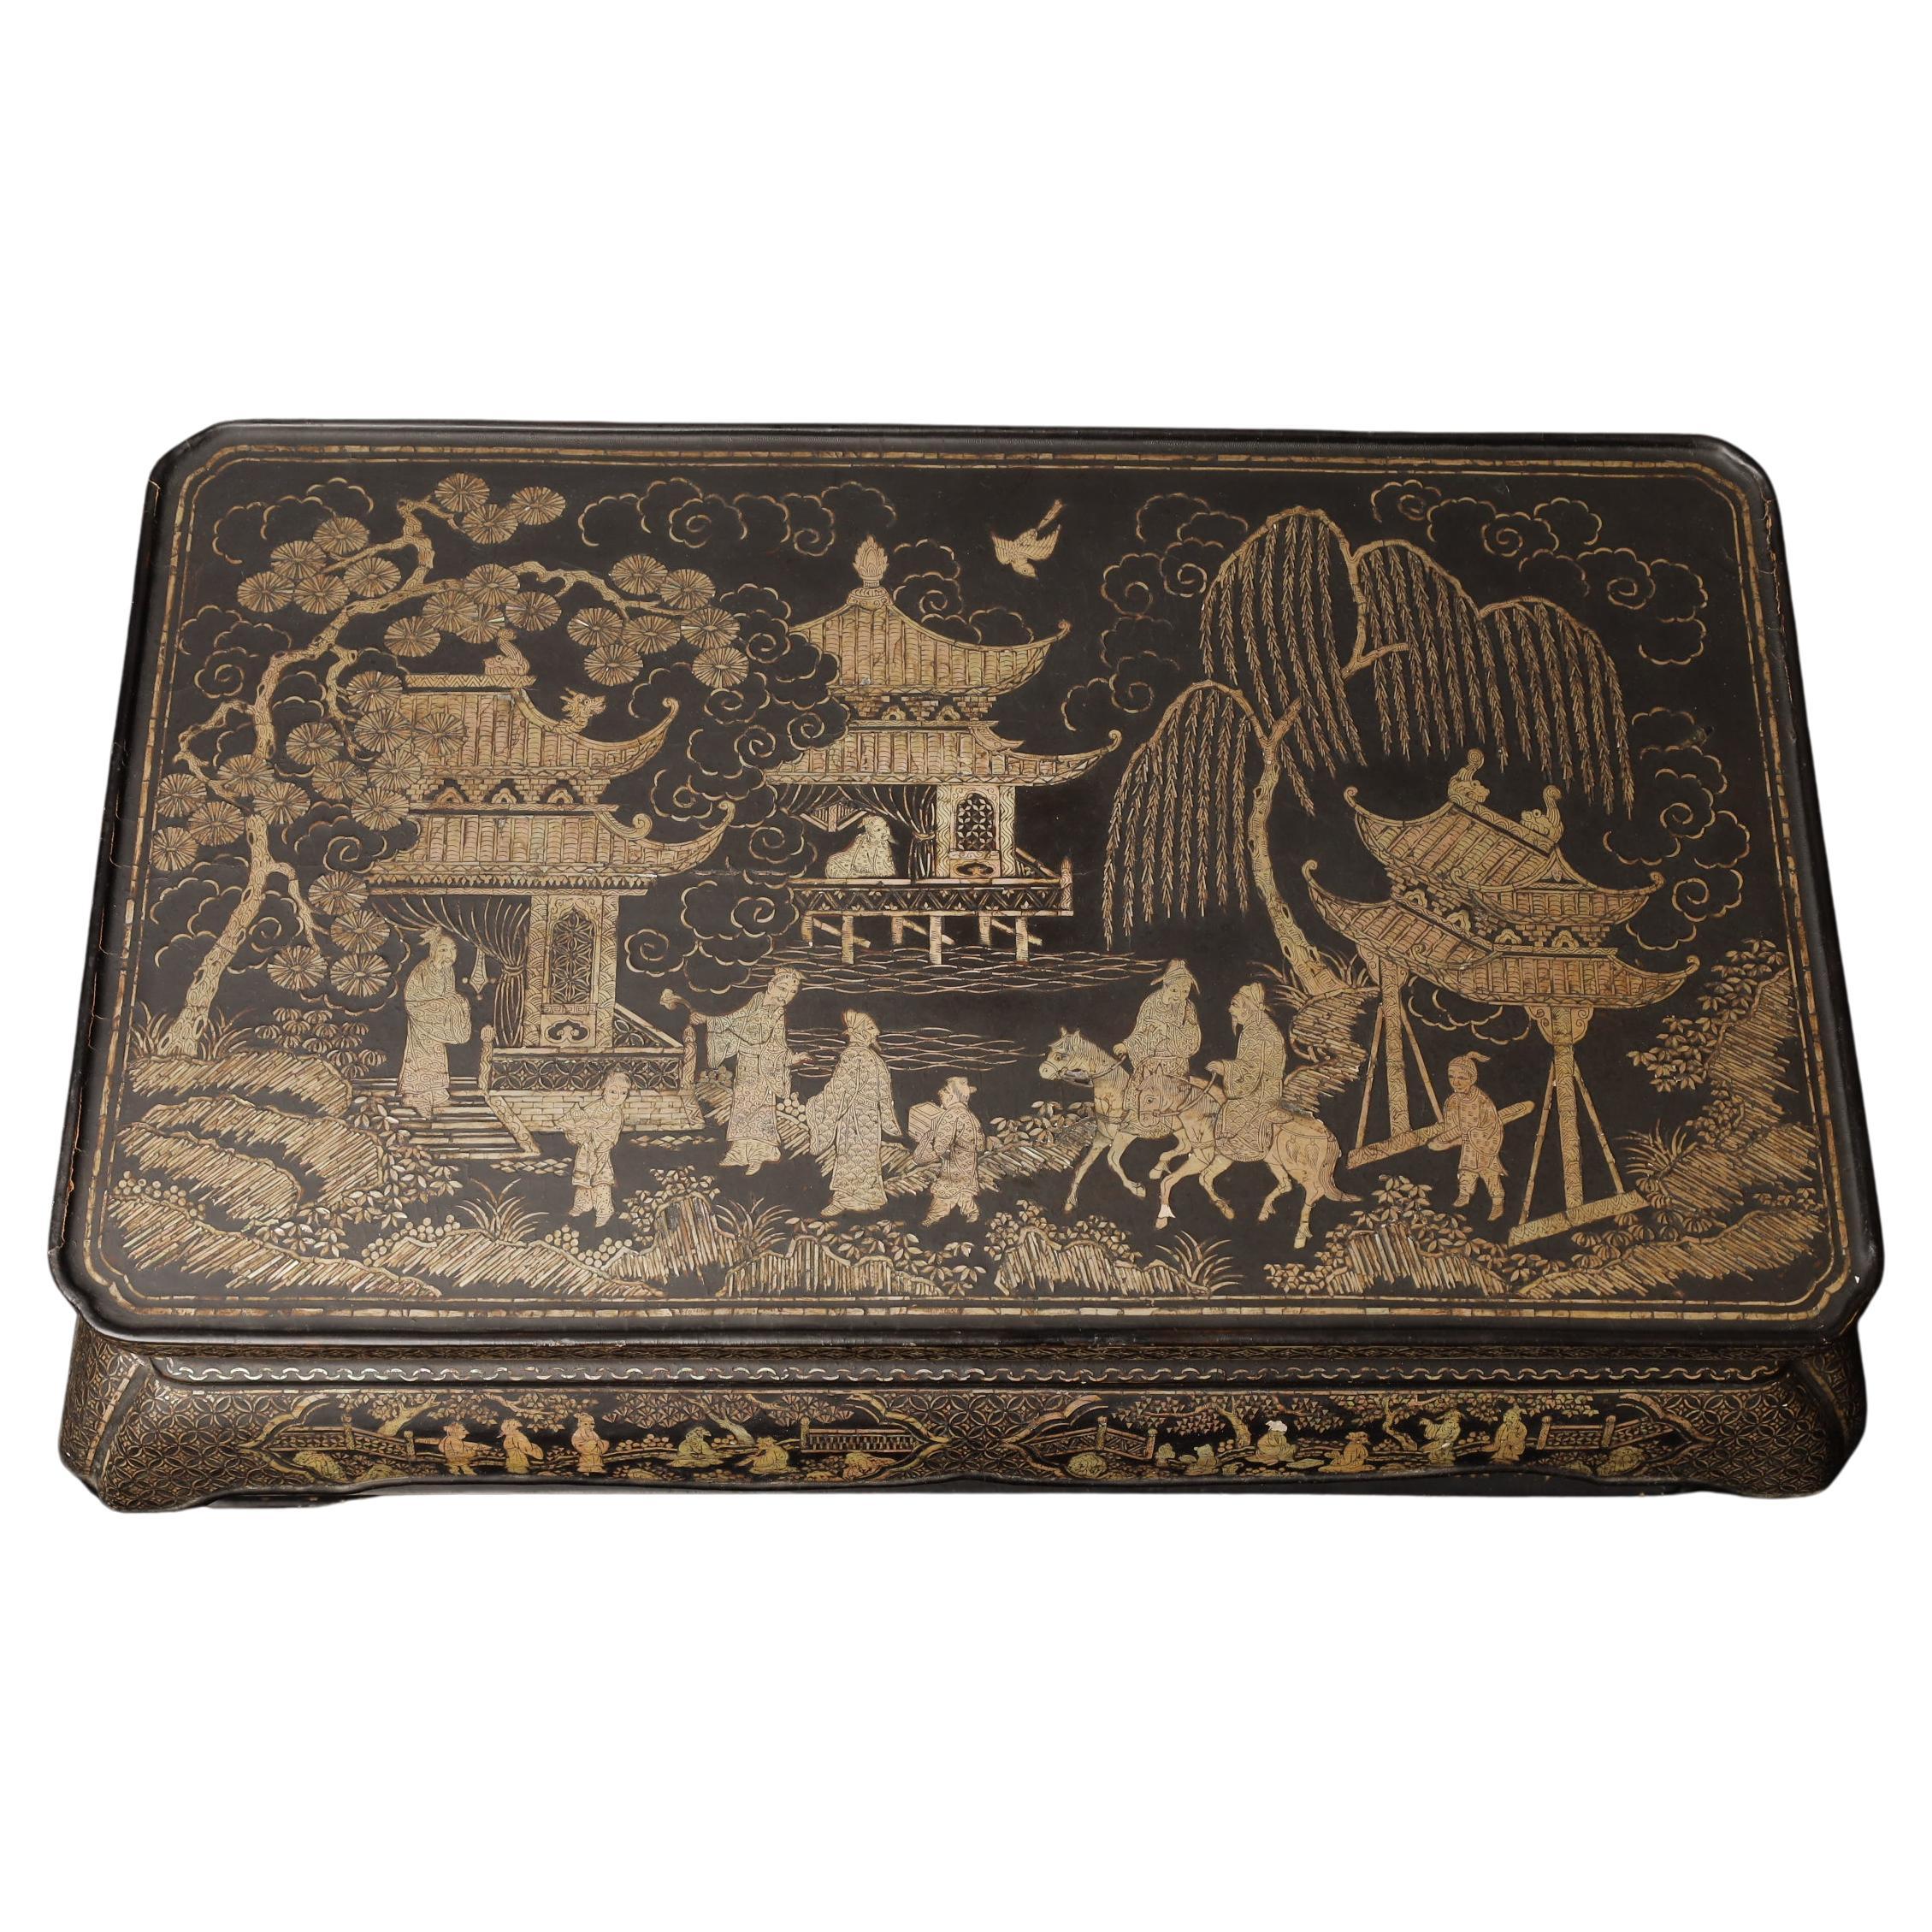 Ming Dynasty Period Scholar's Garden: Mother-of-Pearl Inlaid Lacquer Kang Table For Sale